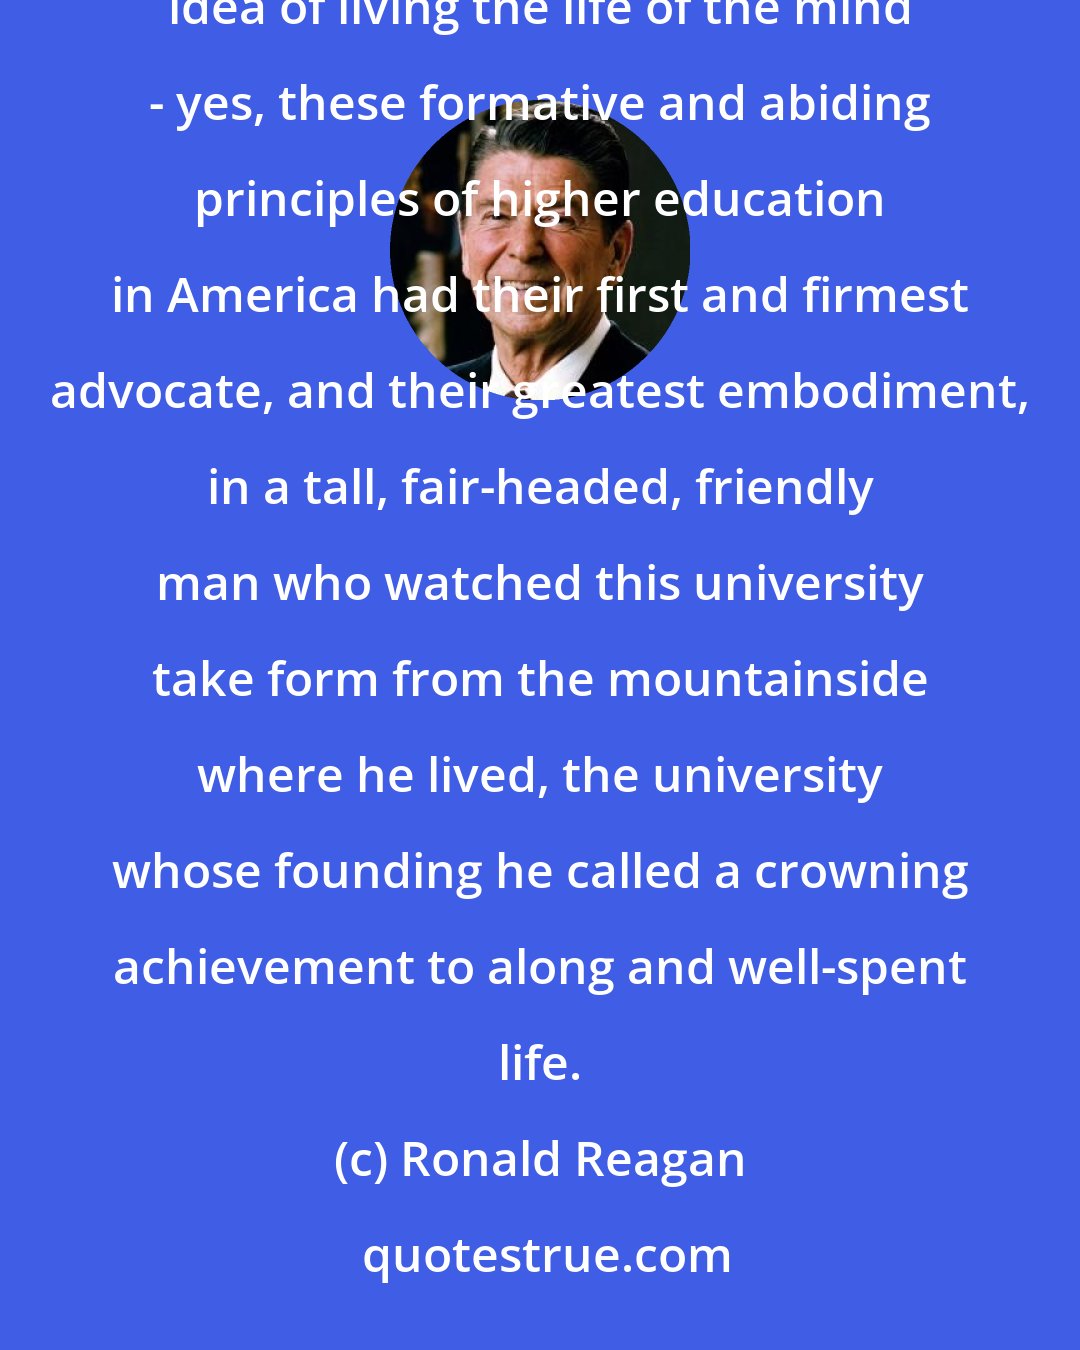 Ronald Reagan: The pursuit of science, the study of the great works, the value of free inquiry, in short, the very idea of living the life of the mind - yes, these formative and abiding principles of higher education in America had their first and firmest advocate, and their greatest embodiment, in a tall, fair-headed, friendly man who watched this university take form from the mountainside where he lived, the university whose founding he called a crowning achievement to along and well-spent life.